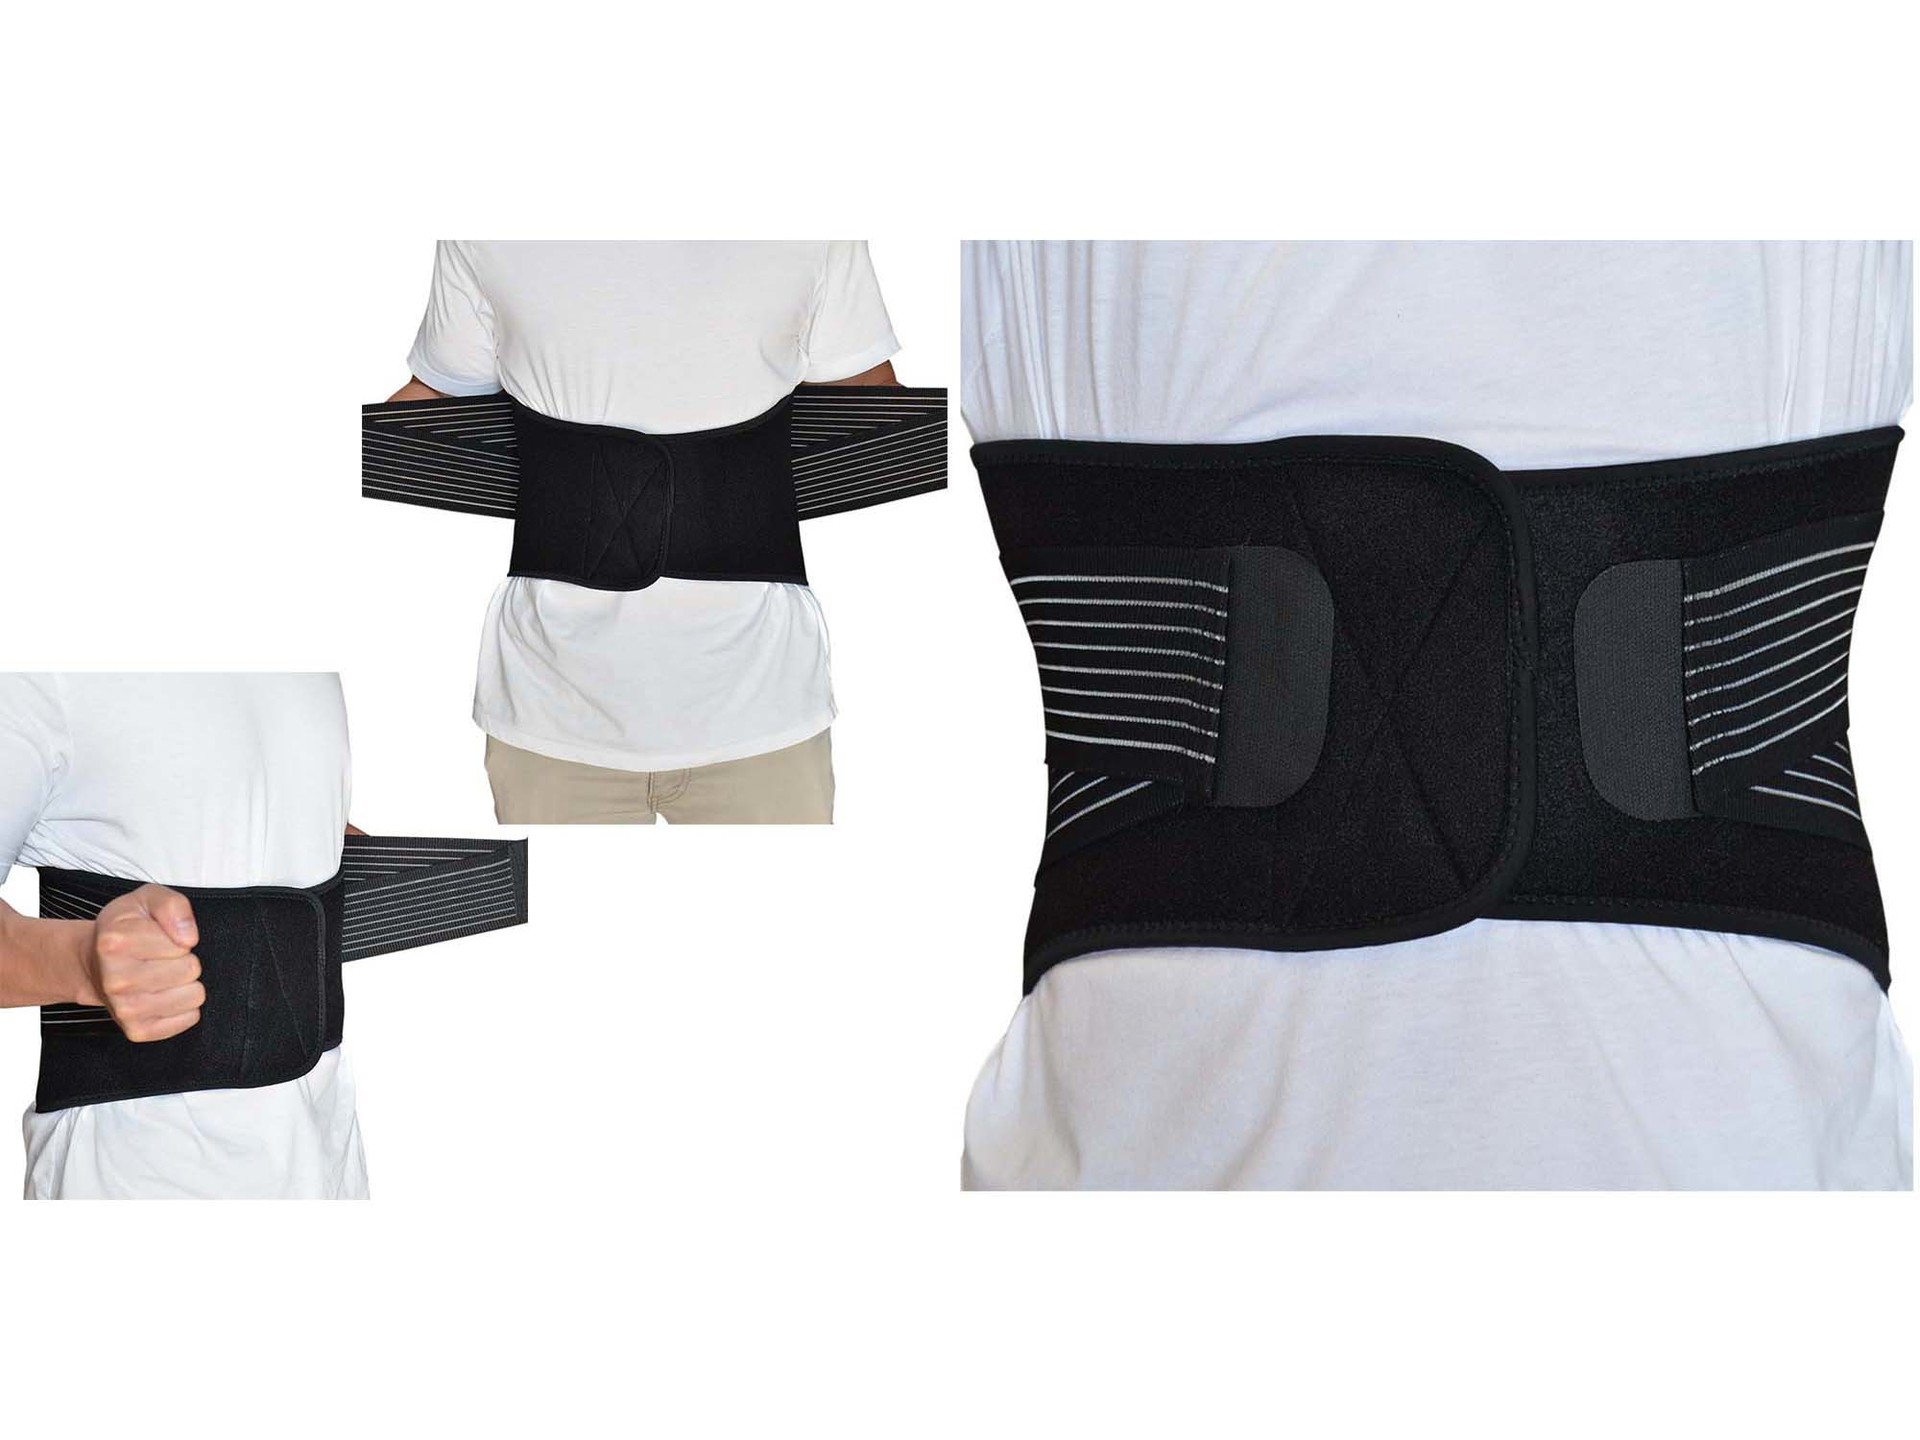 Prosperity sports knee support wholesale for basketball